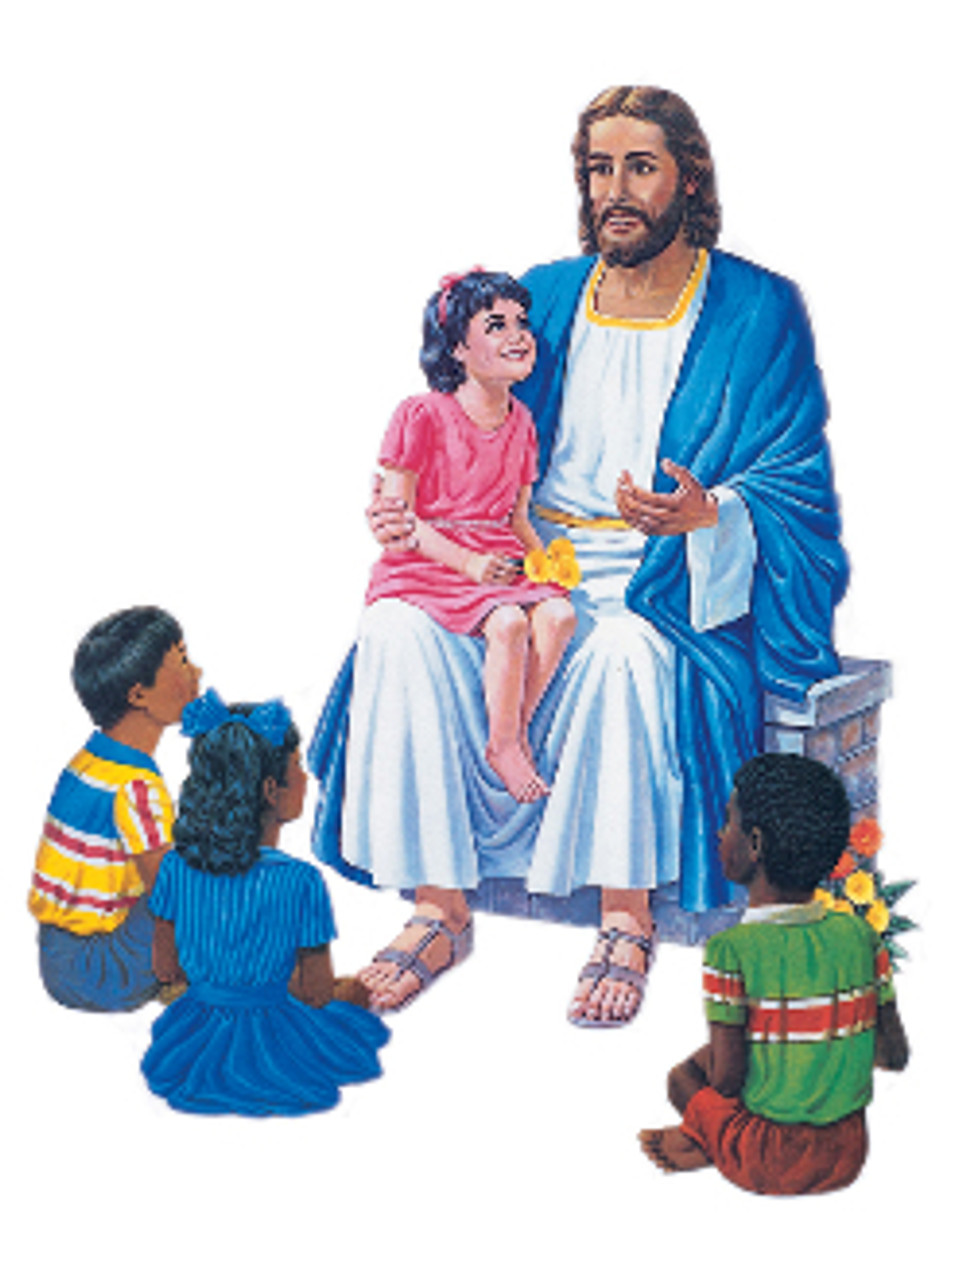 Jesus seated with 4 children